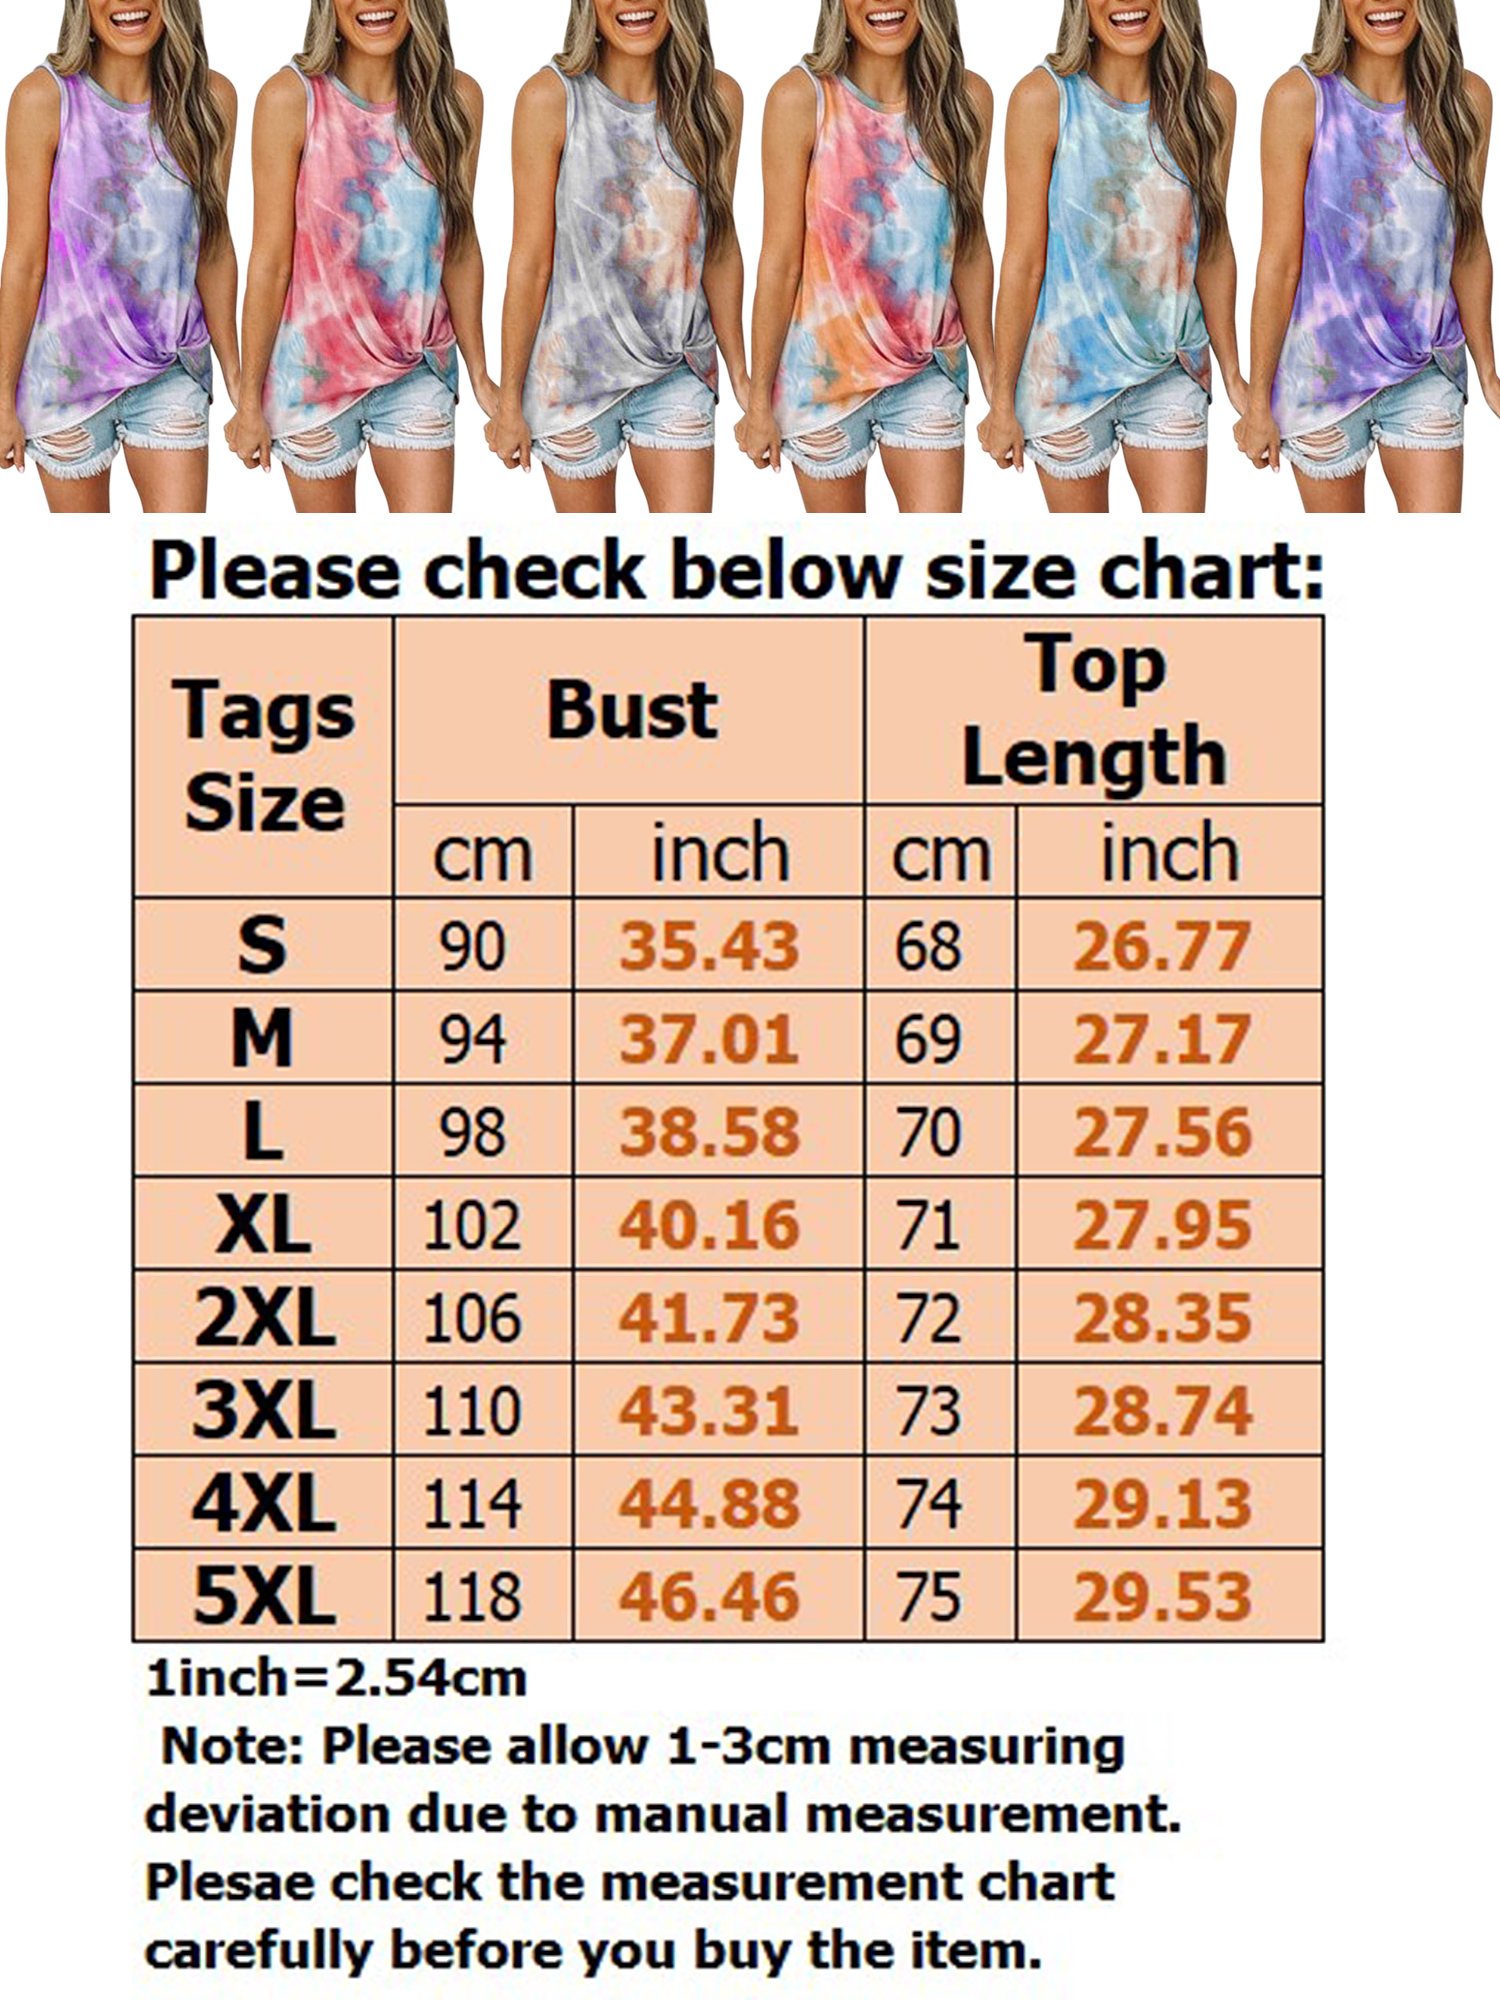 Plus Size Tank Top for Women Fashion Sleeveless Round Neck Tie Dye Tops Casual Summer Gradient Color Vest T Shirt 5XL - image 2 of 3